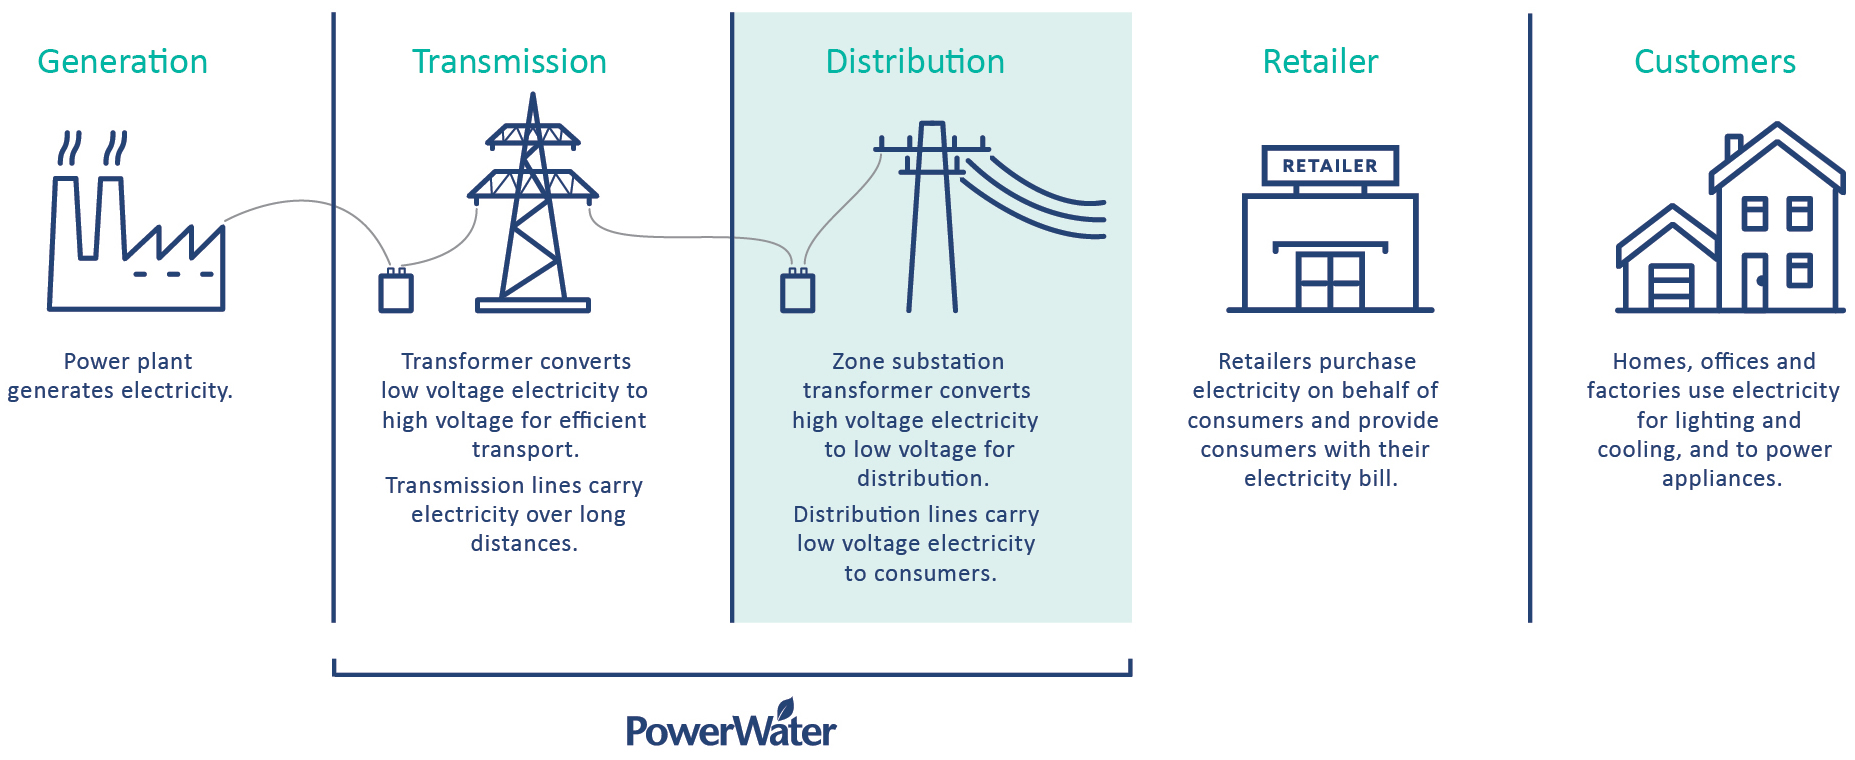 Power and WAter is responsibile for transmission and distribution of electricity within the electricity supply chain.